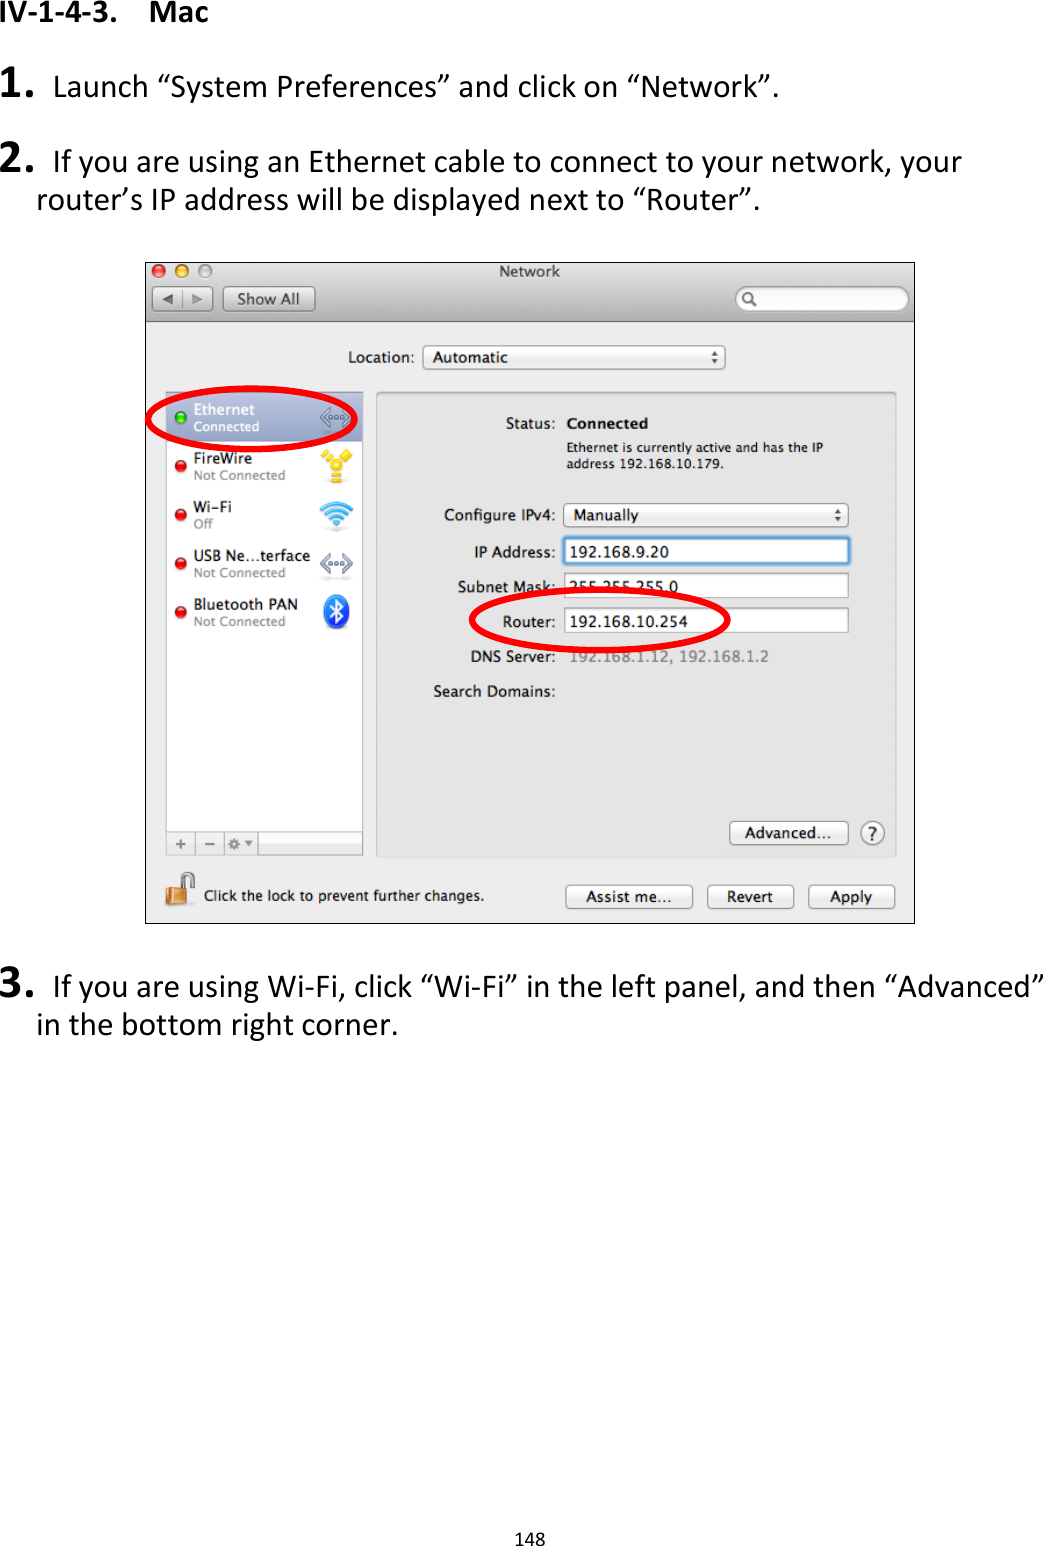 148  IV-1-4-3.  Mac  1.   Launch “System Preferences” and click on “Network”.  2.   If you are using an Ethernet cable to connect to your network, your router’s IP address will be displayed next to “Router”.    3.   If you are using Wi-Fi, click “Wi-Fi” in the left panel, and then “Advanced” in the bottom right corner.  